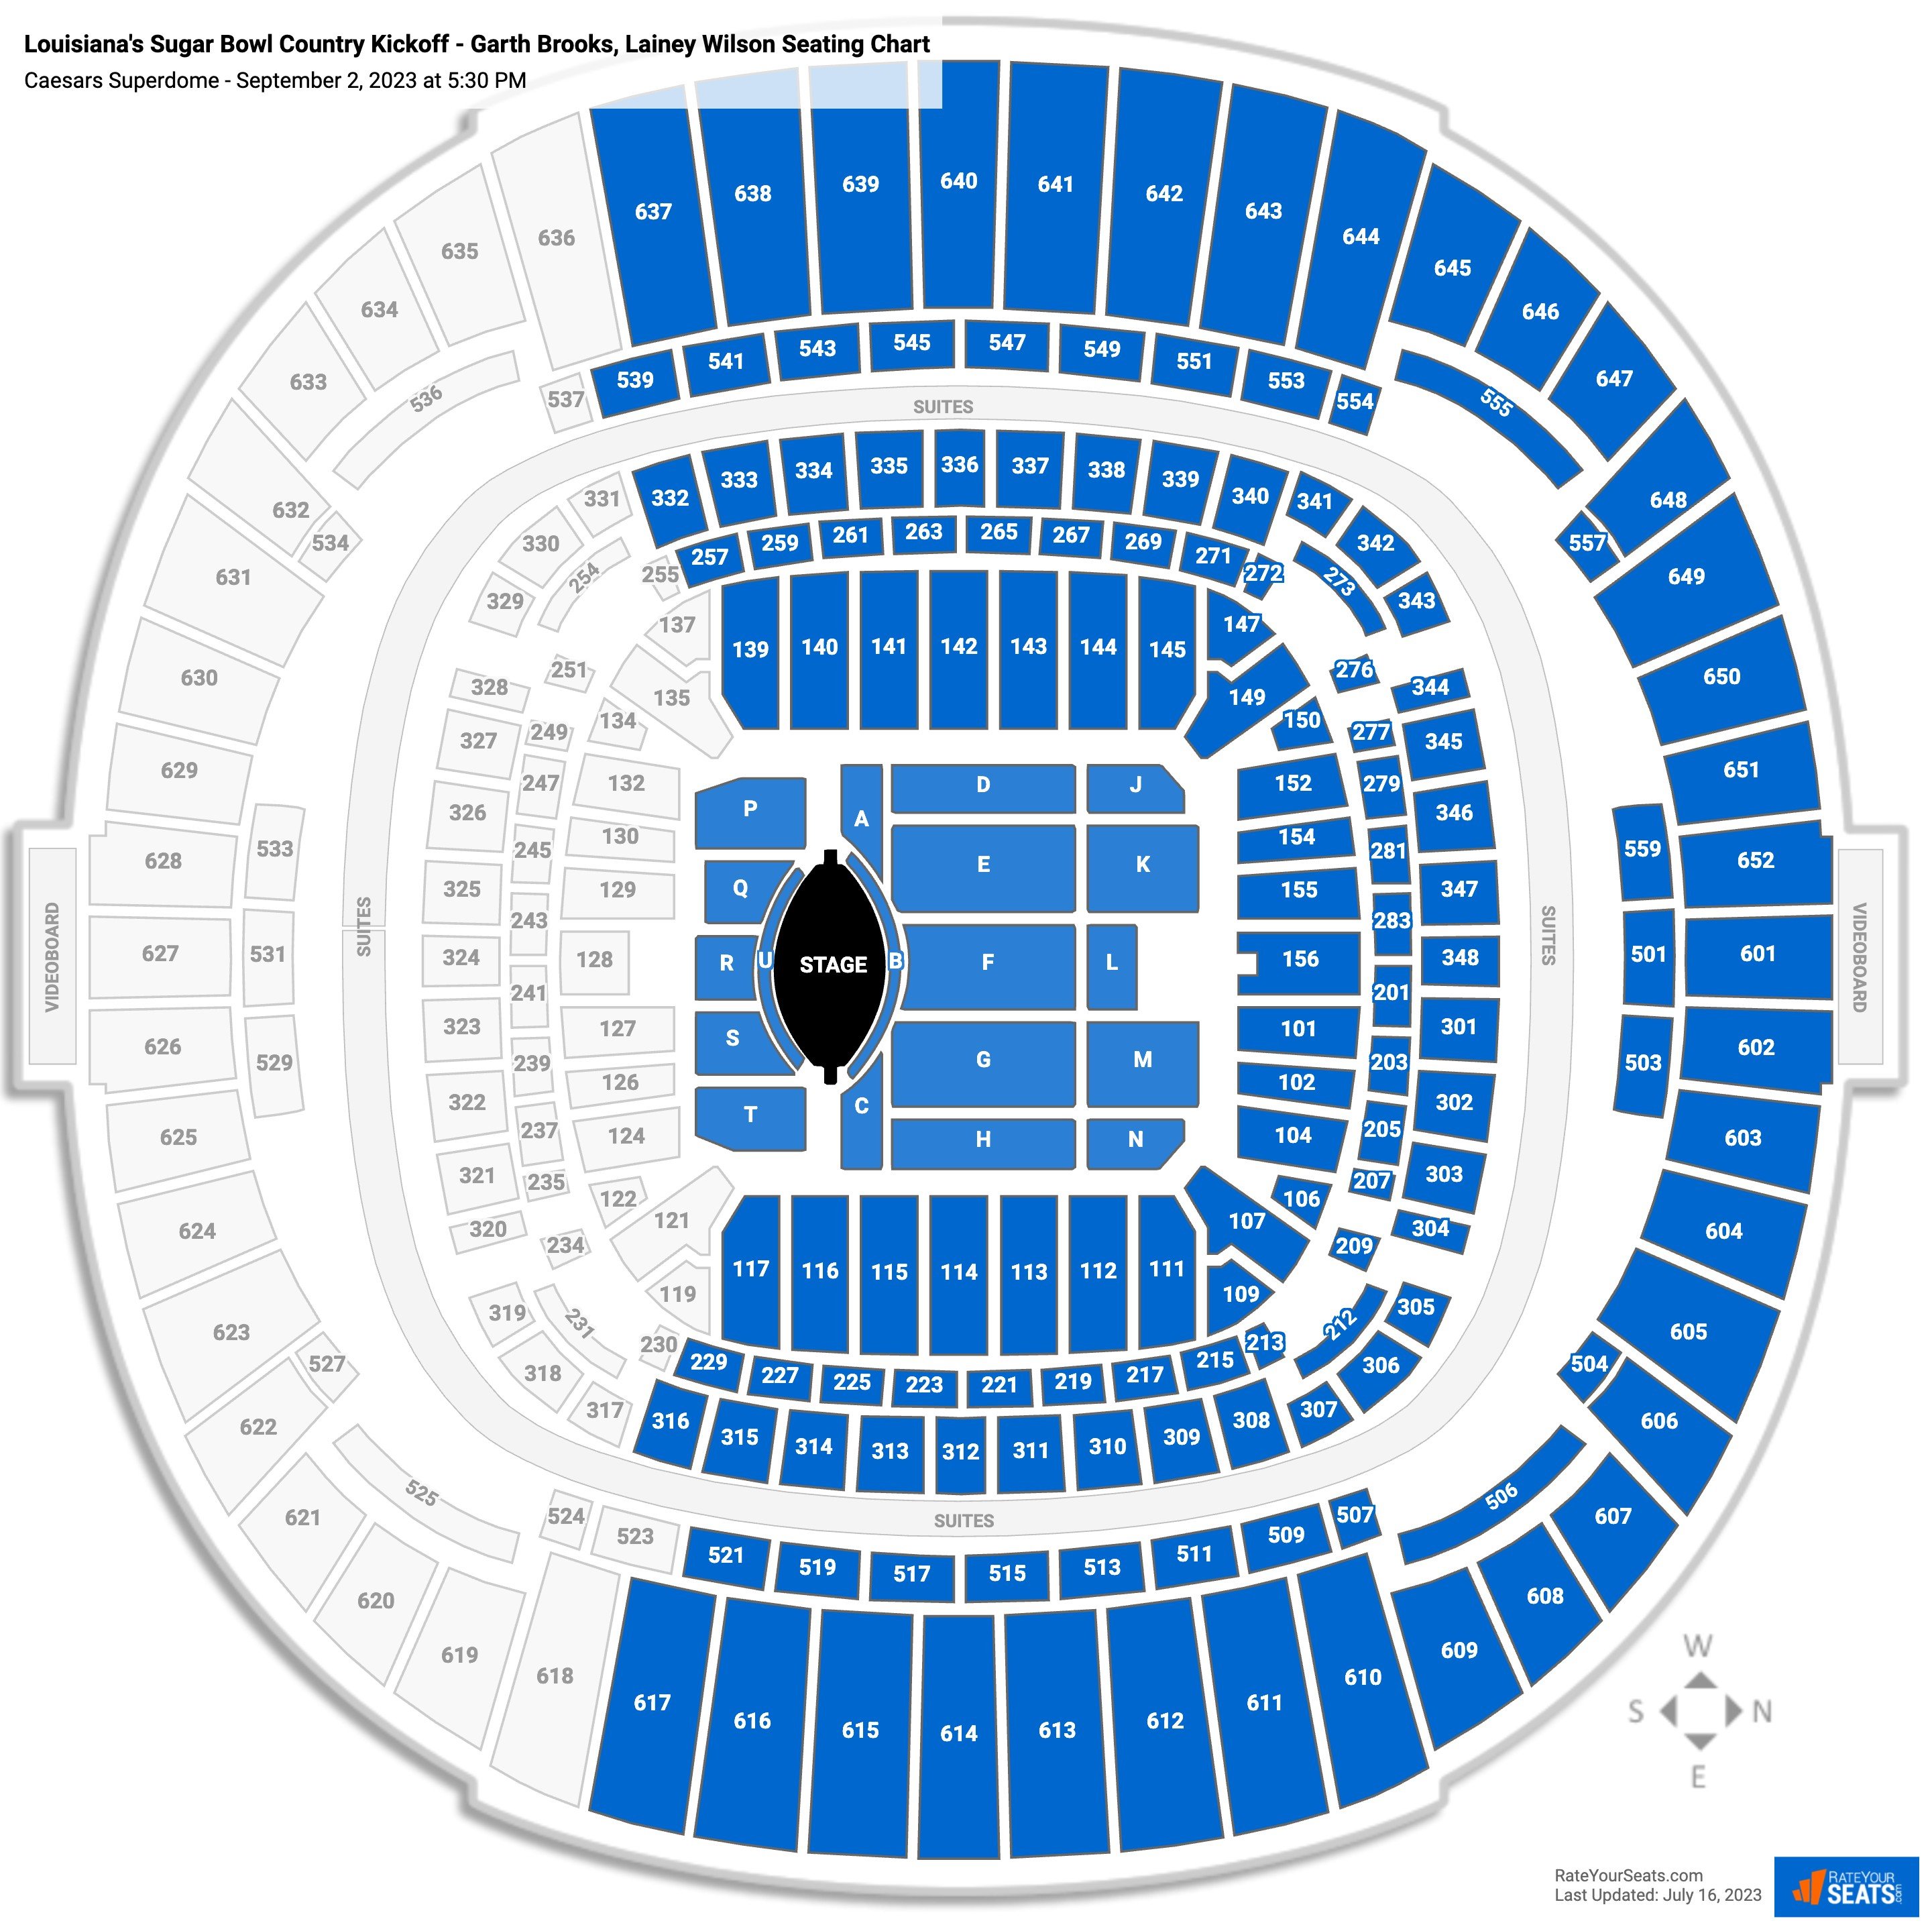 Caesars Superdome Concert Seating Chart